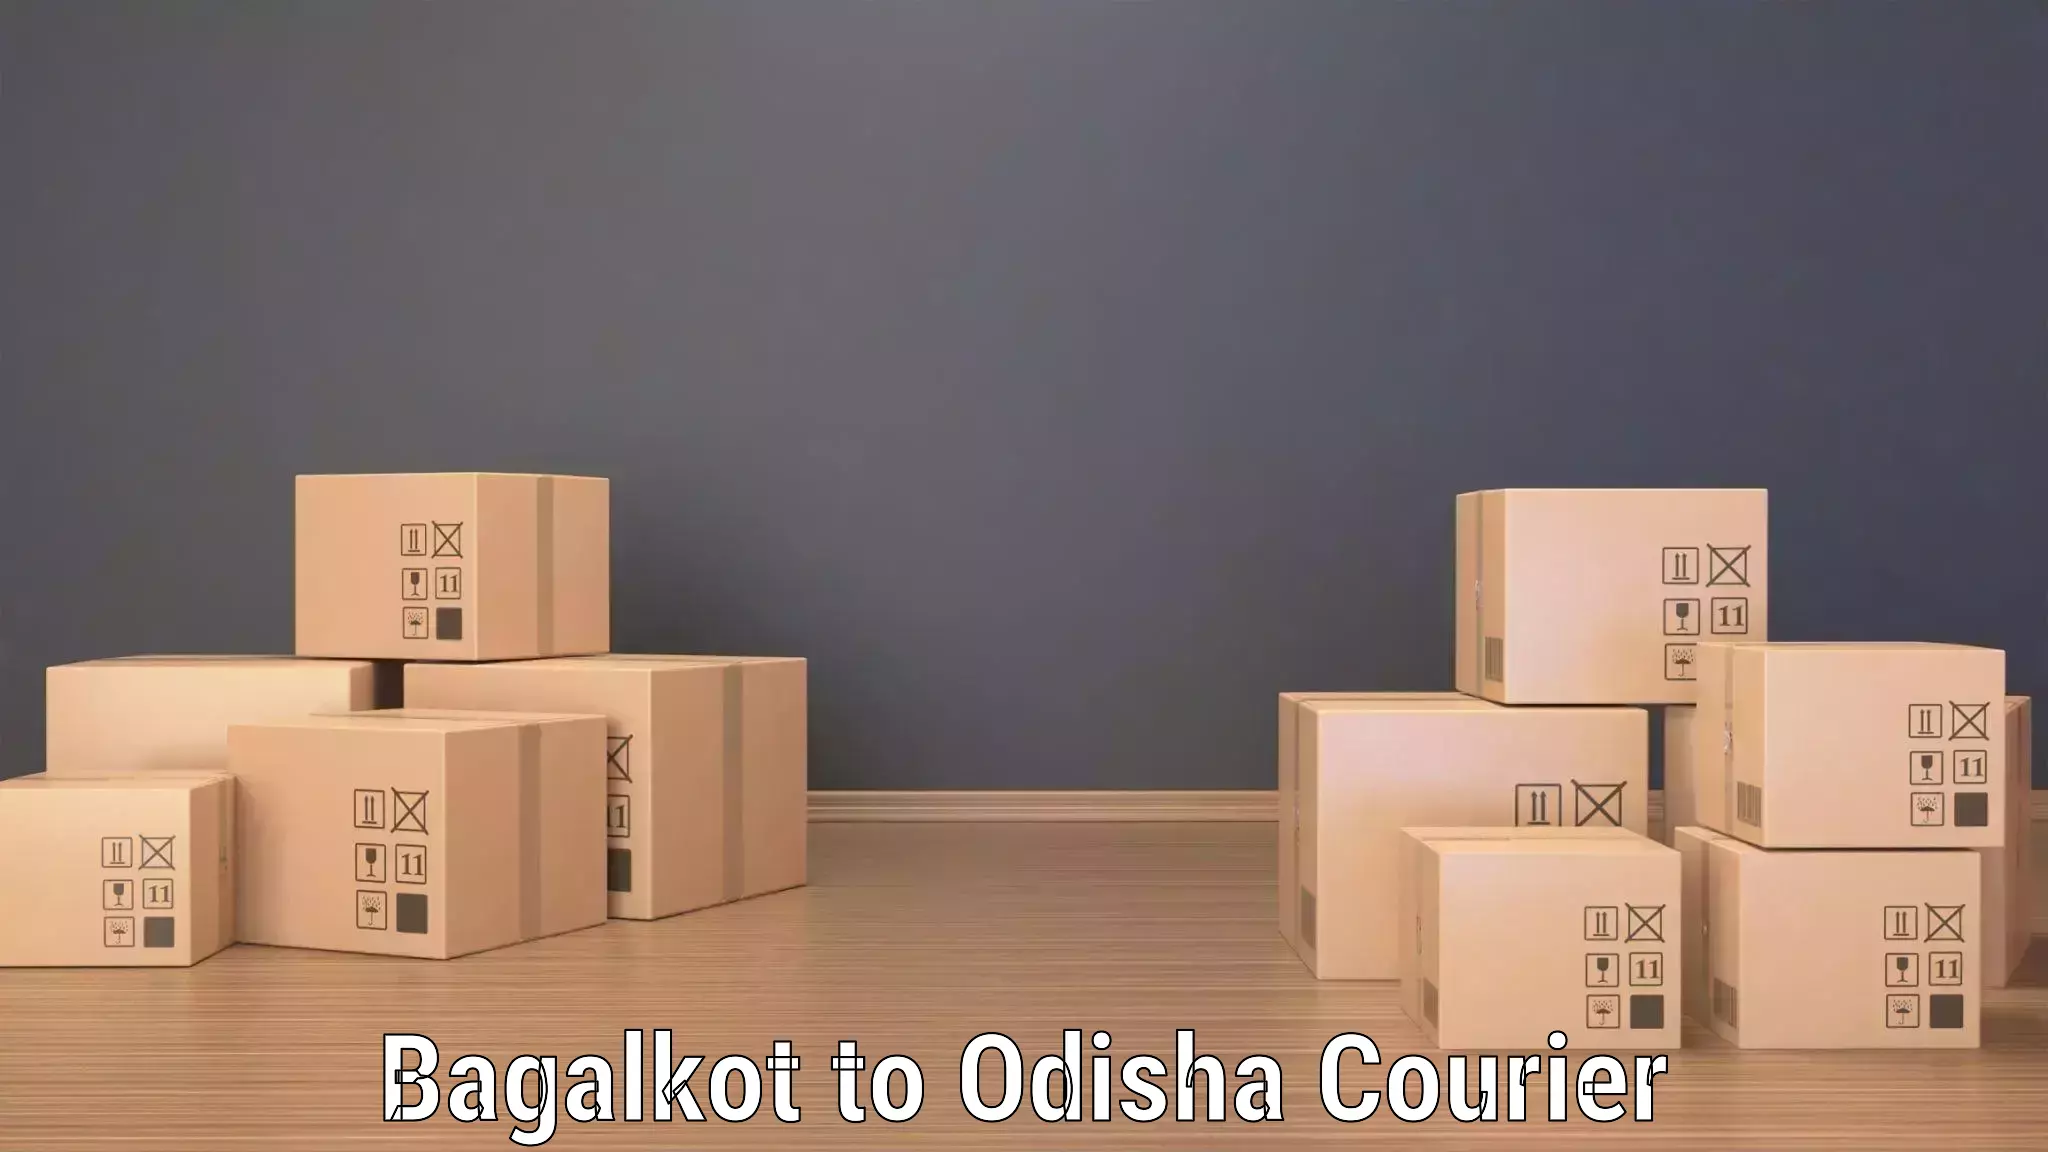 Courier service innovation Bagalkot to Puranakatak